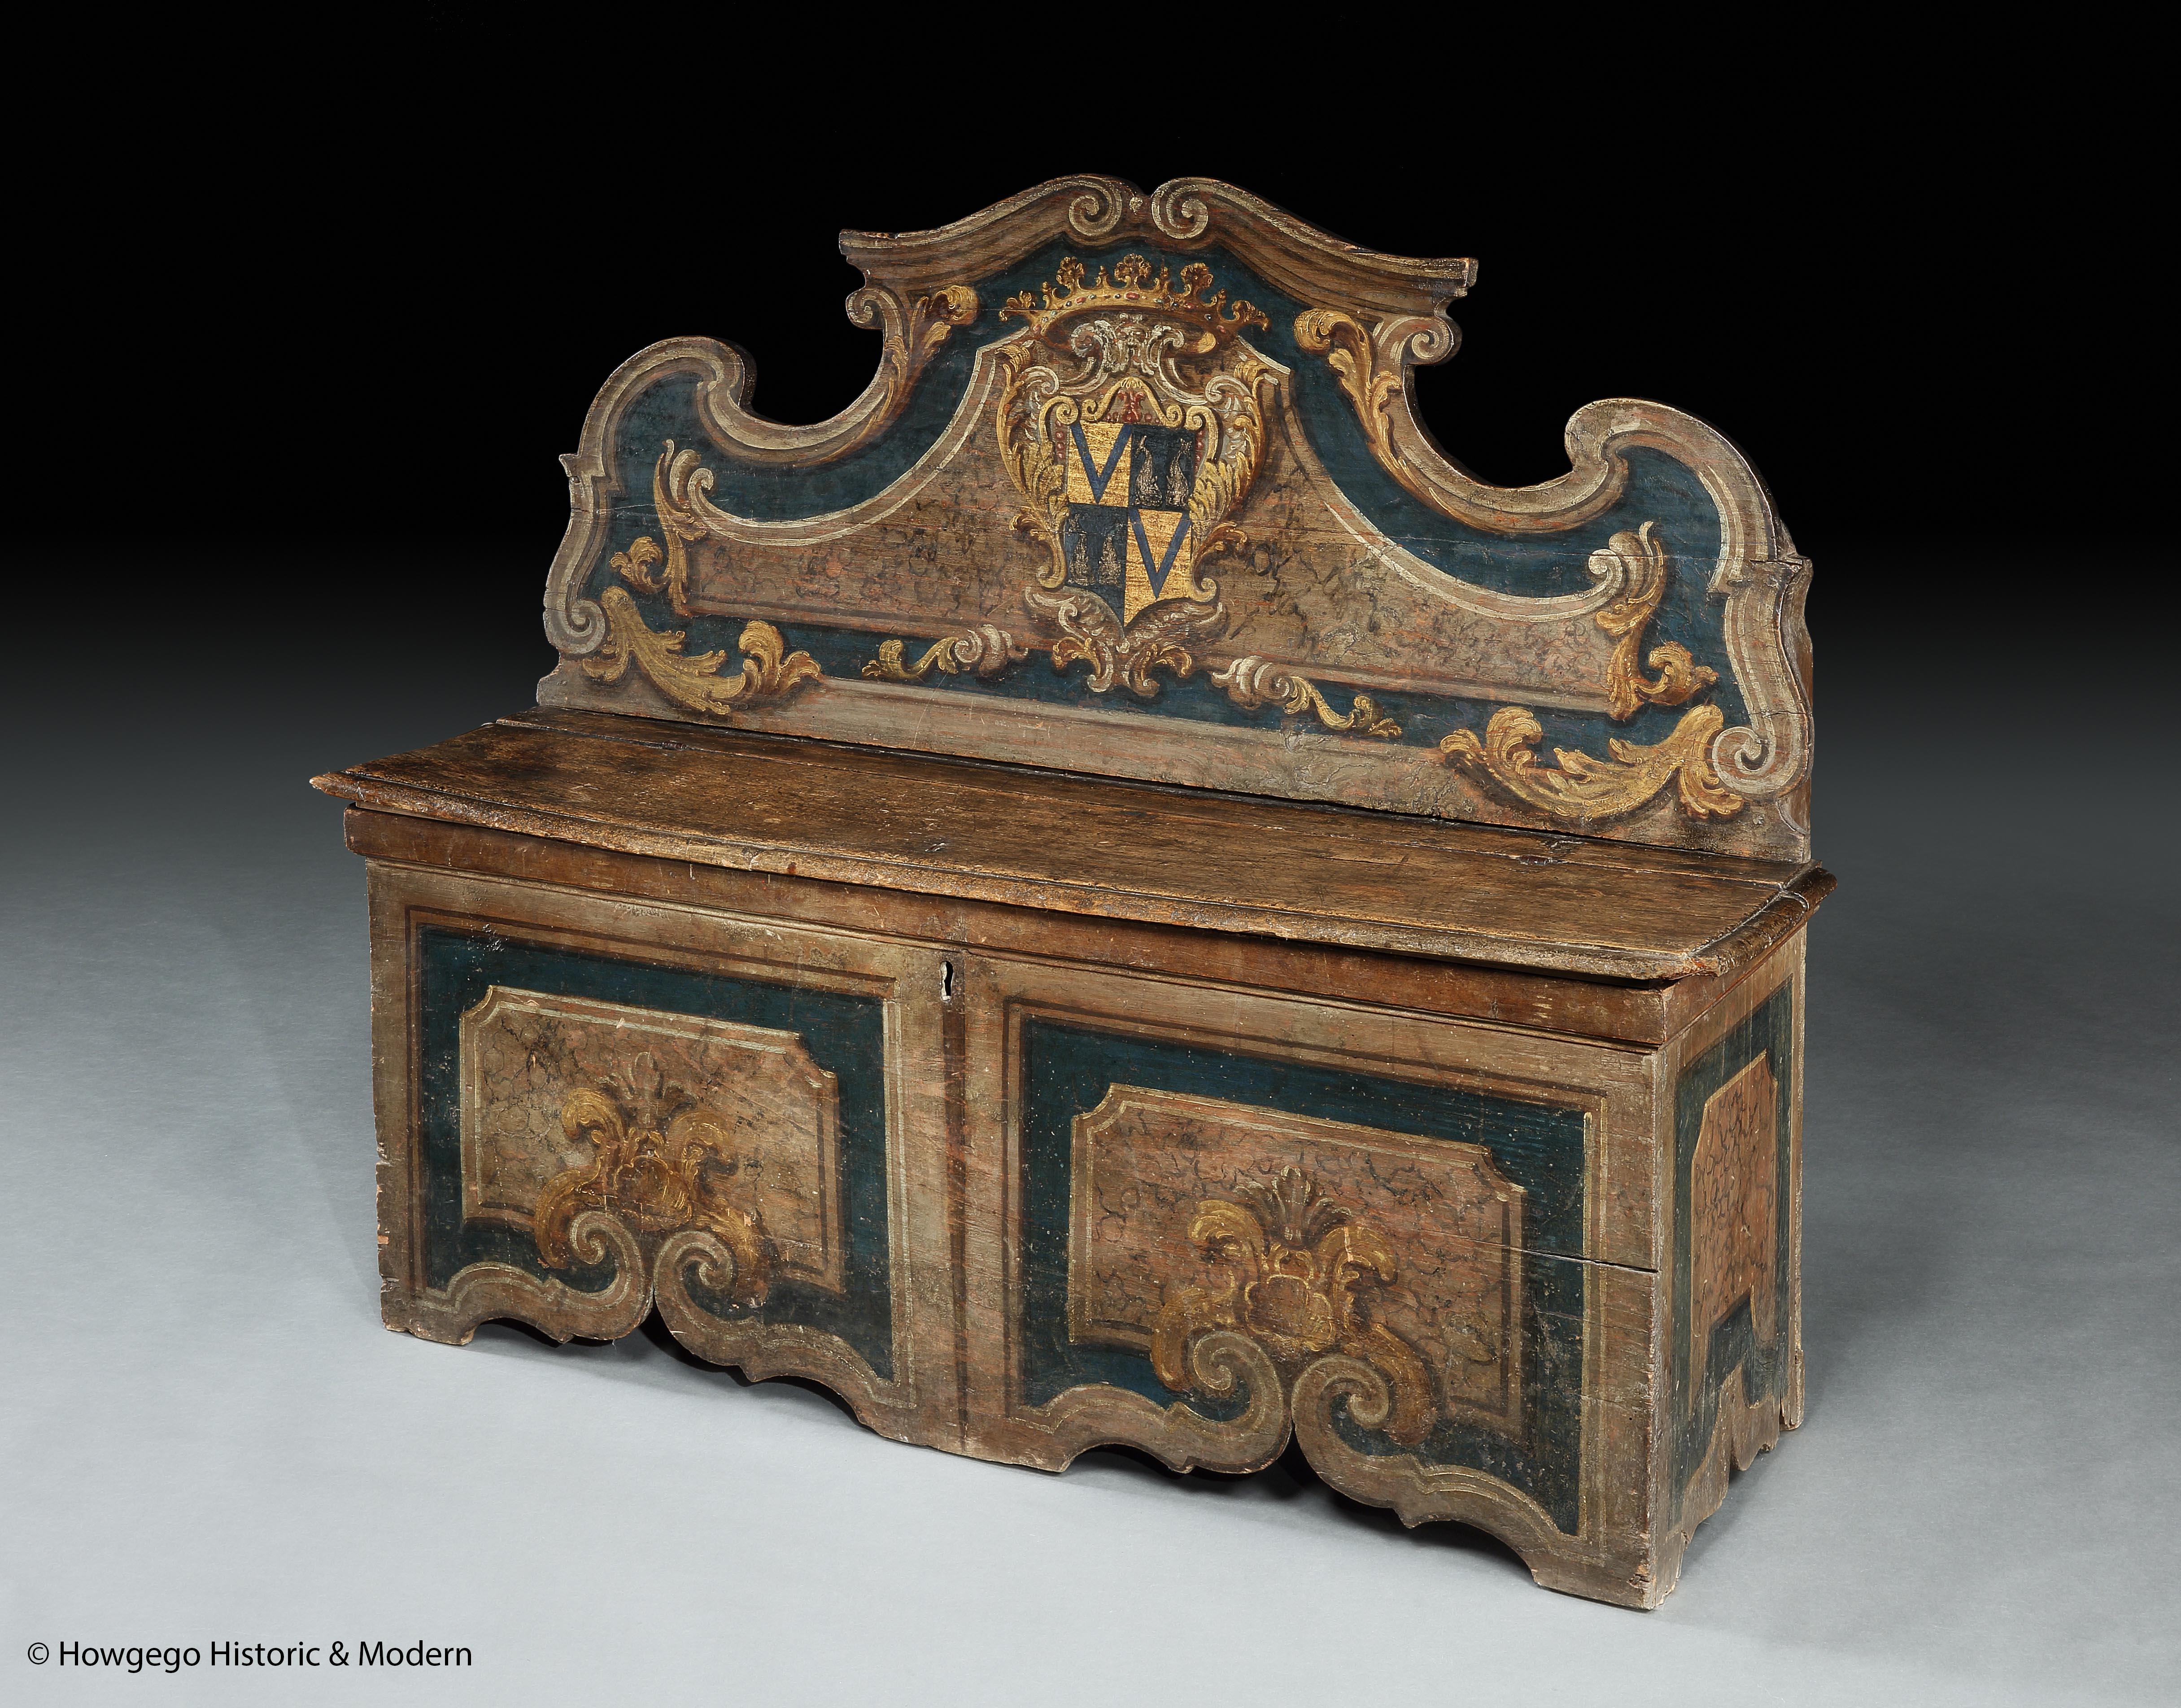 A rare, petite, 18th century, venetian, painted armorial, Cassapanca (chest-bench), measures 44½’ high, 49½“ long.

- Unusual small size, and characteristic of cassapanca’s found in Italian Palazzo’s from the Renaissance period with striking